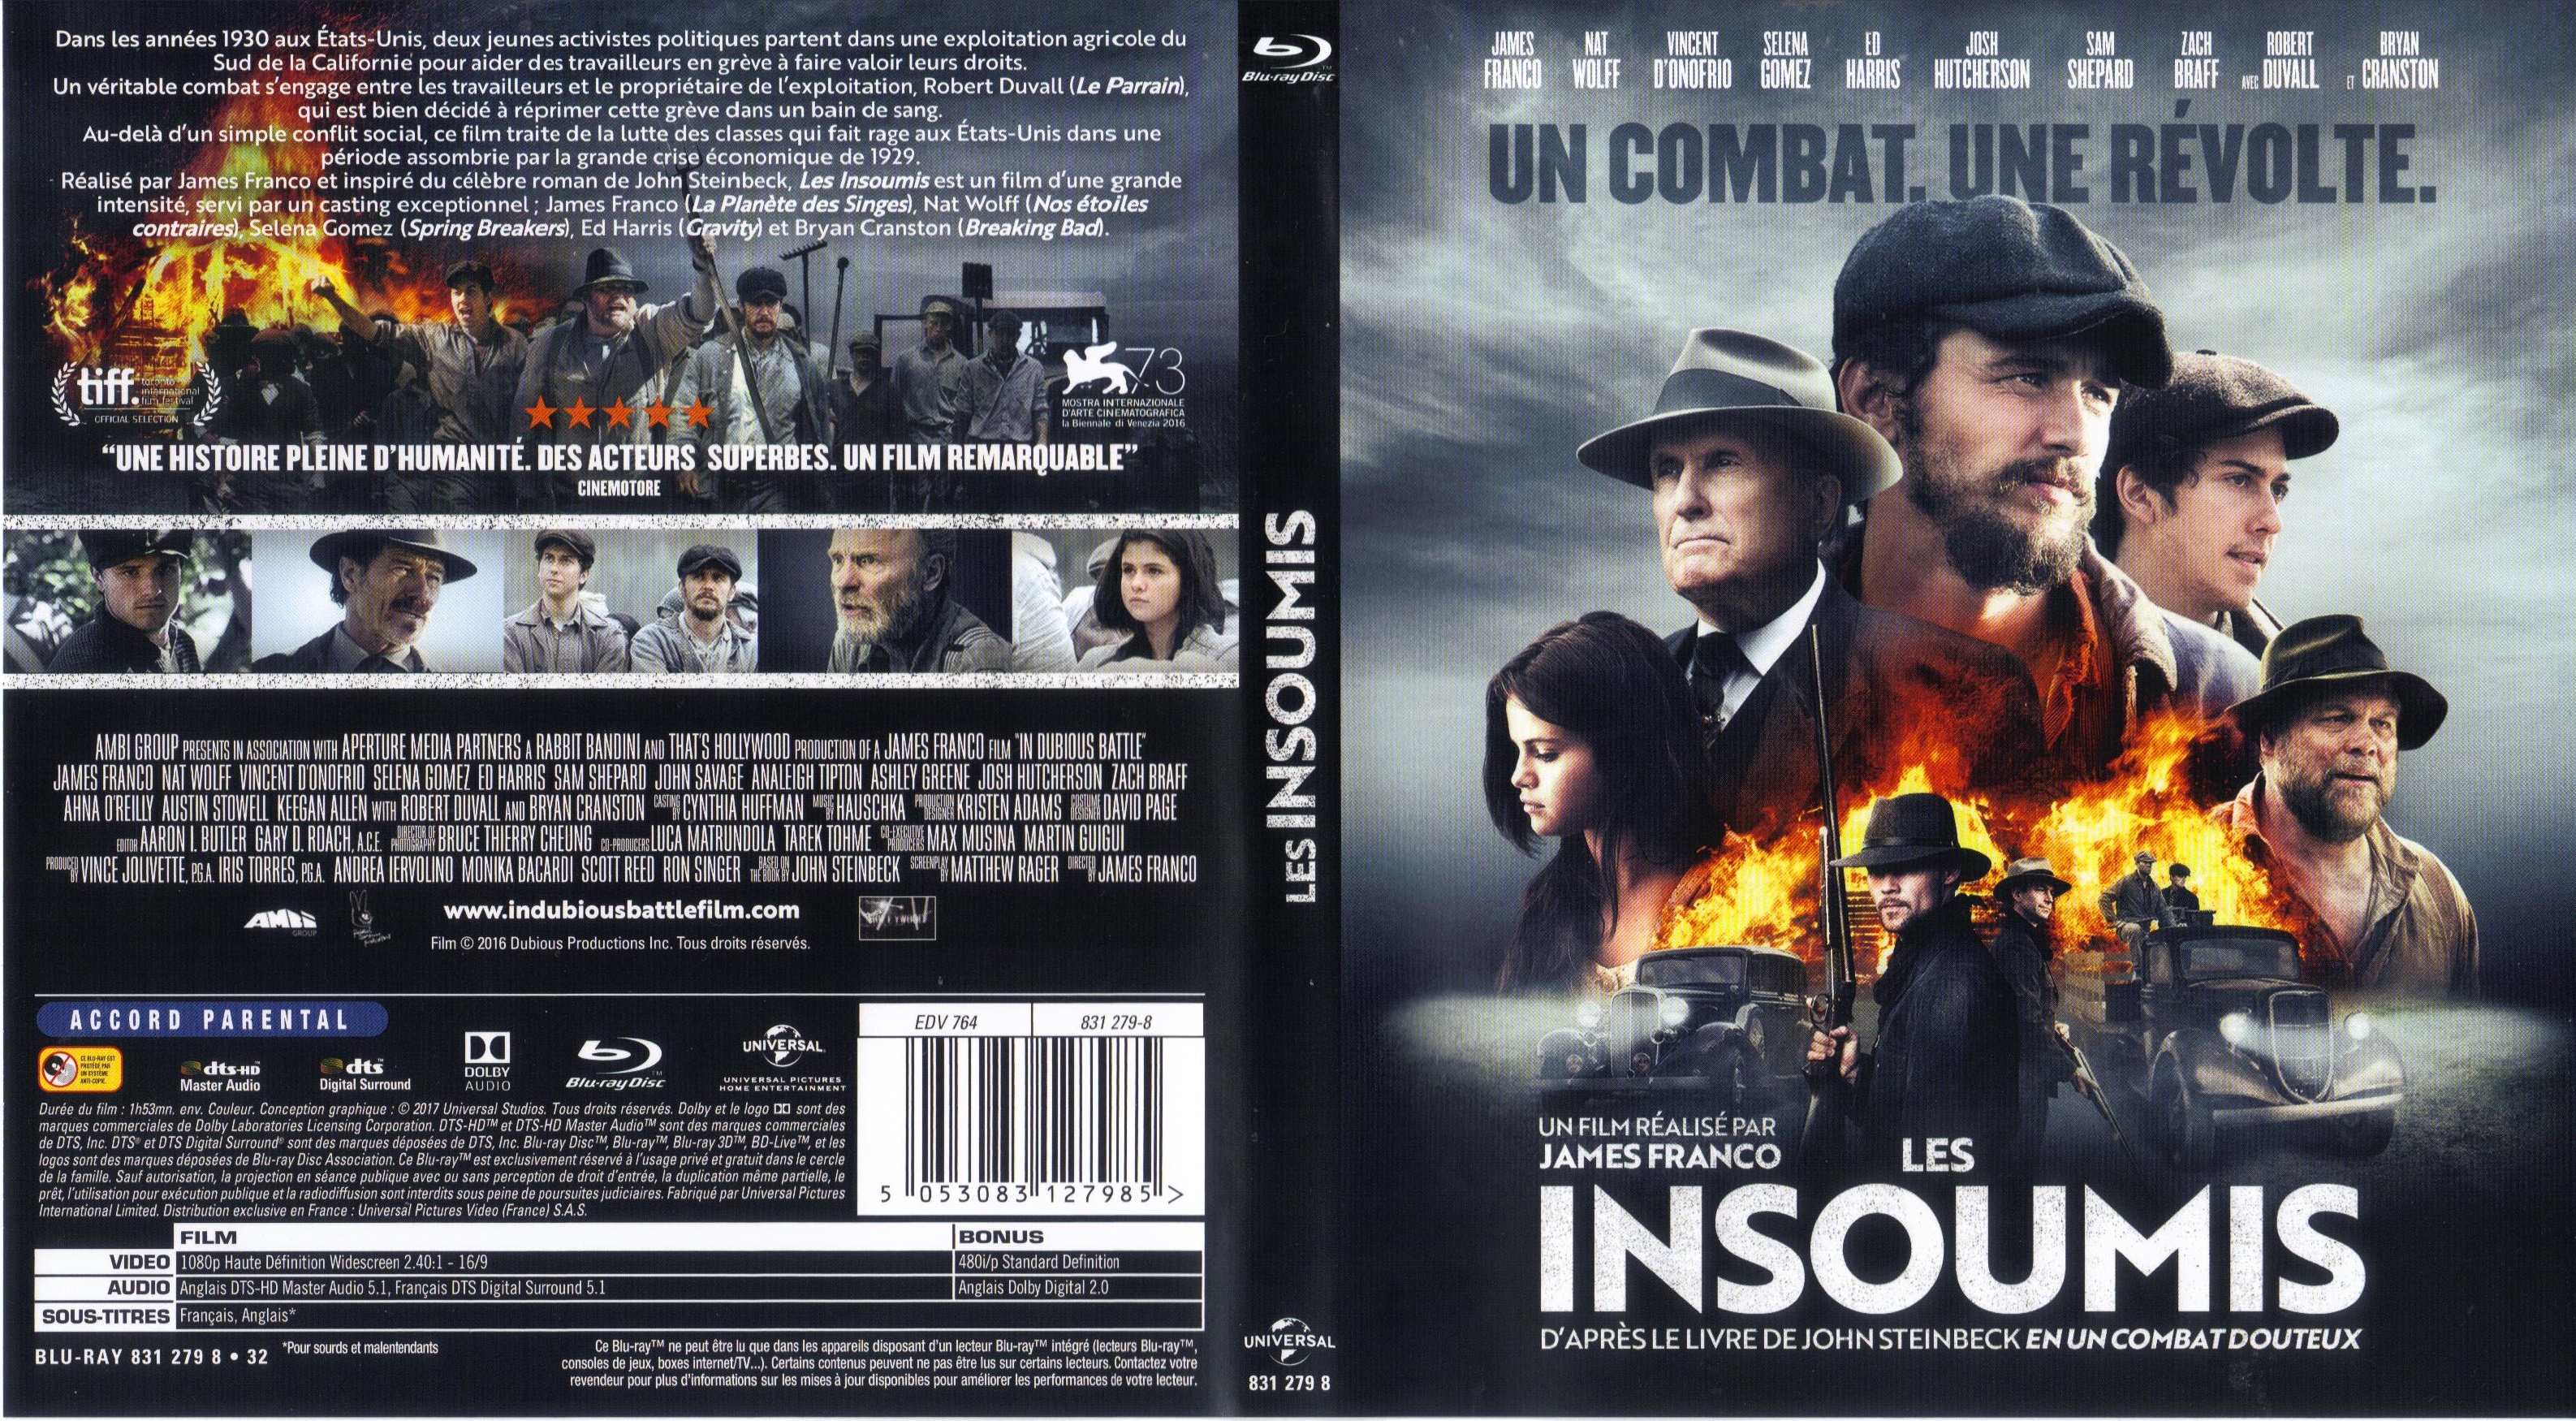 Jaquette DVD Les insoumis (2016) (BLU-RAY)